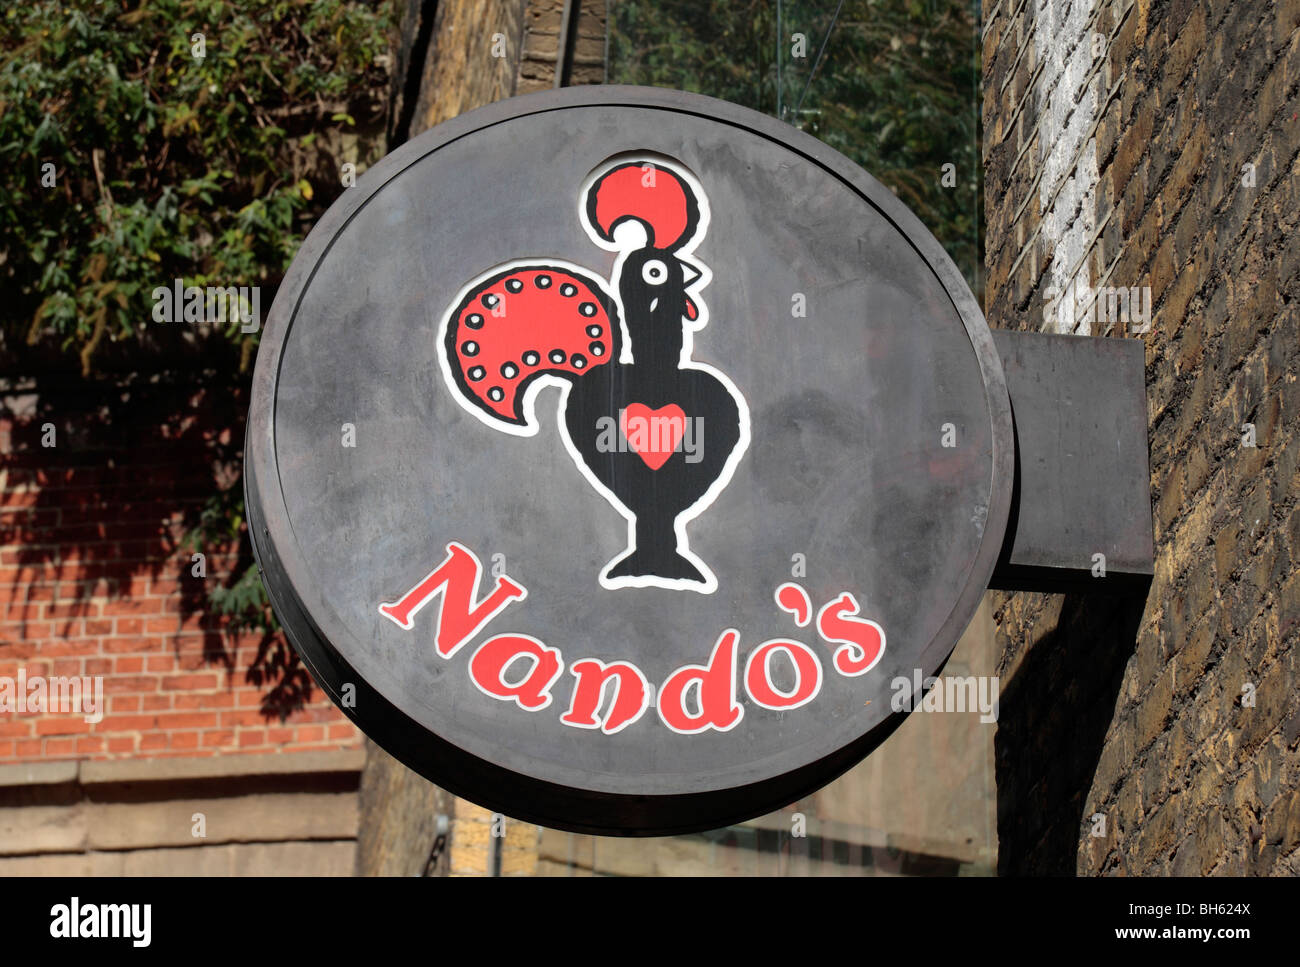 Nando's sign and logo above the restaurant in Clink Street, London, England.  Oct 09 Stock Photo